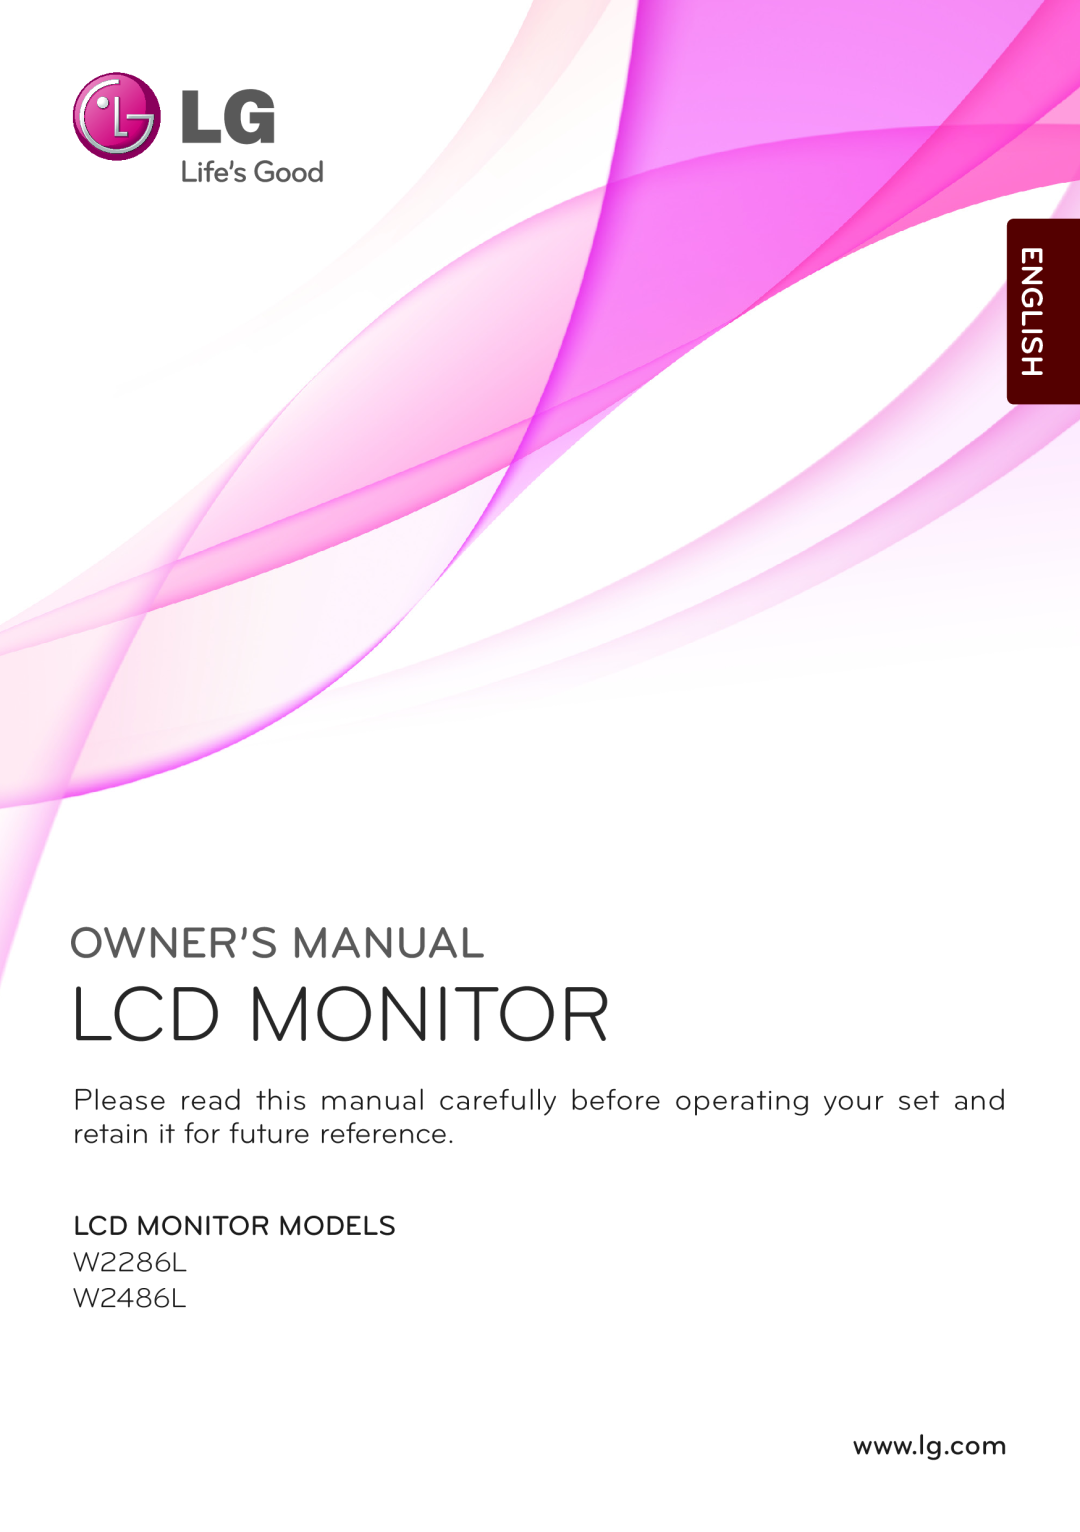 LG Electronics owner manual Lcd Monitor, Owner’S Manual, English, LCD MONITOR MODELS W2286L W2486L 